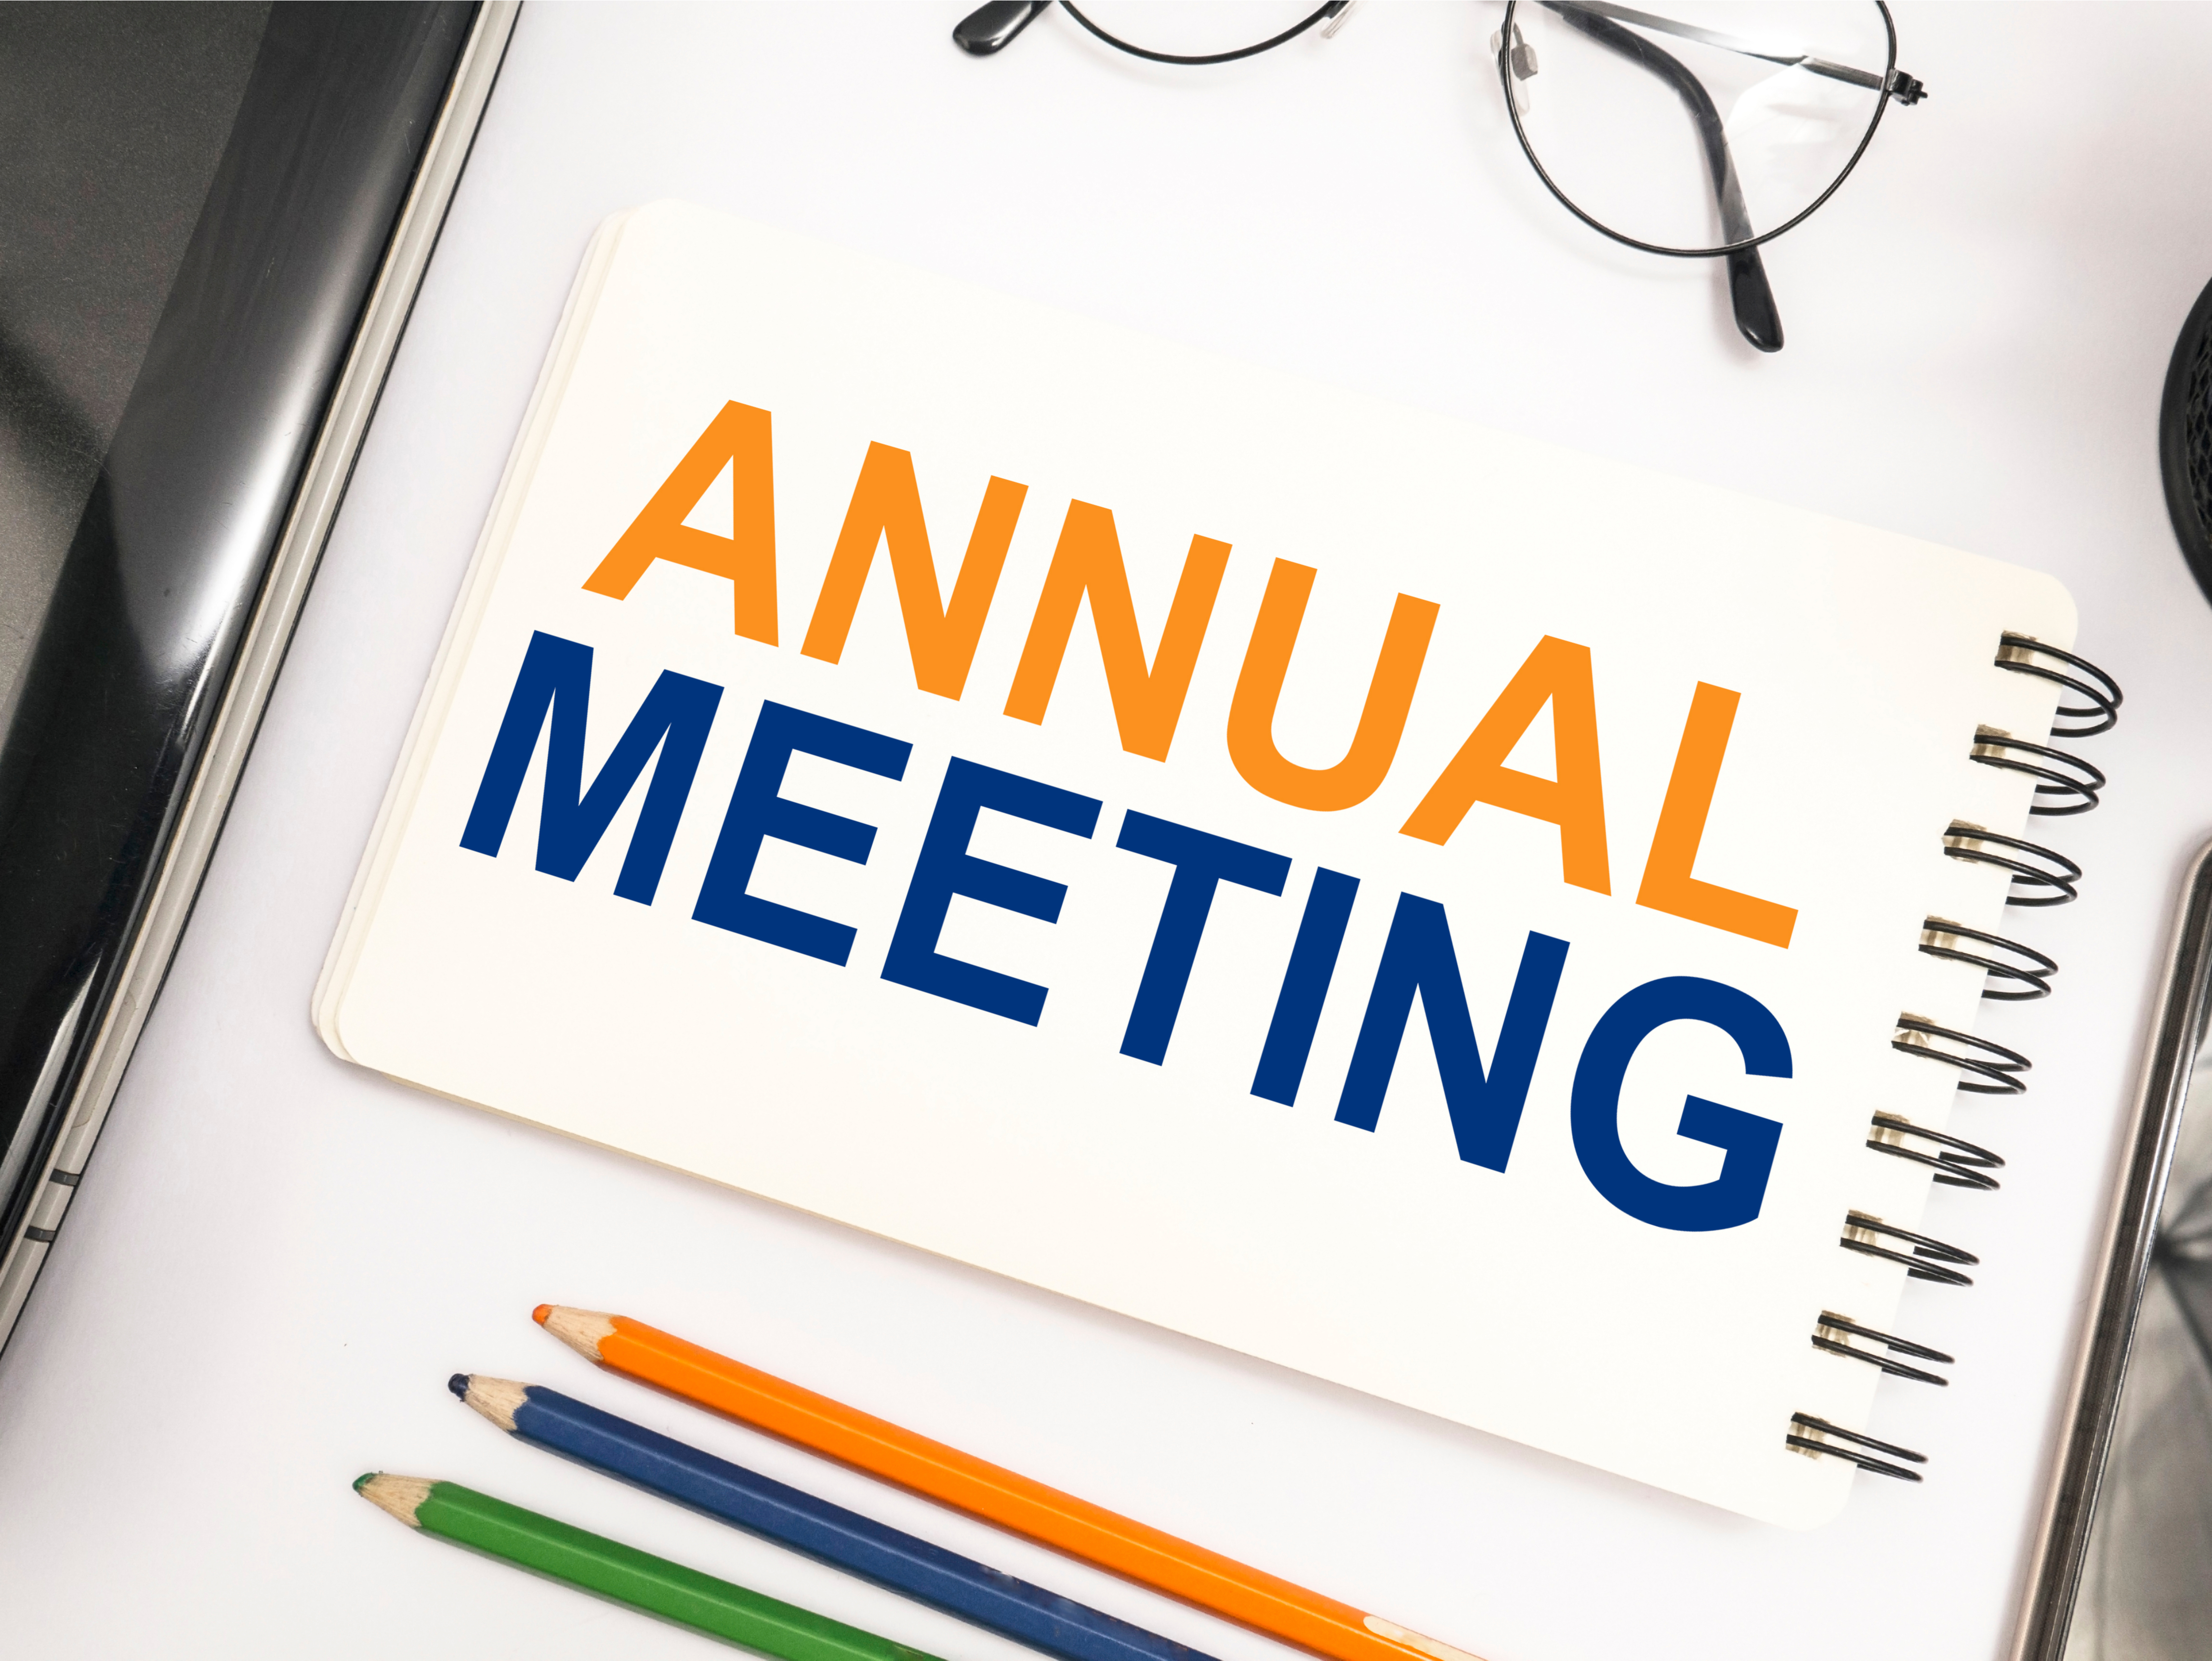 Annual Meeting Board of Directors Nominations Image